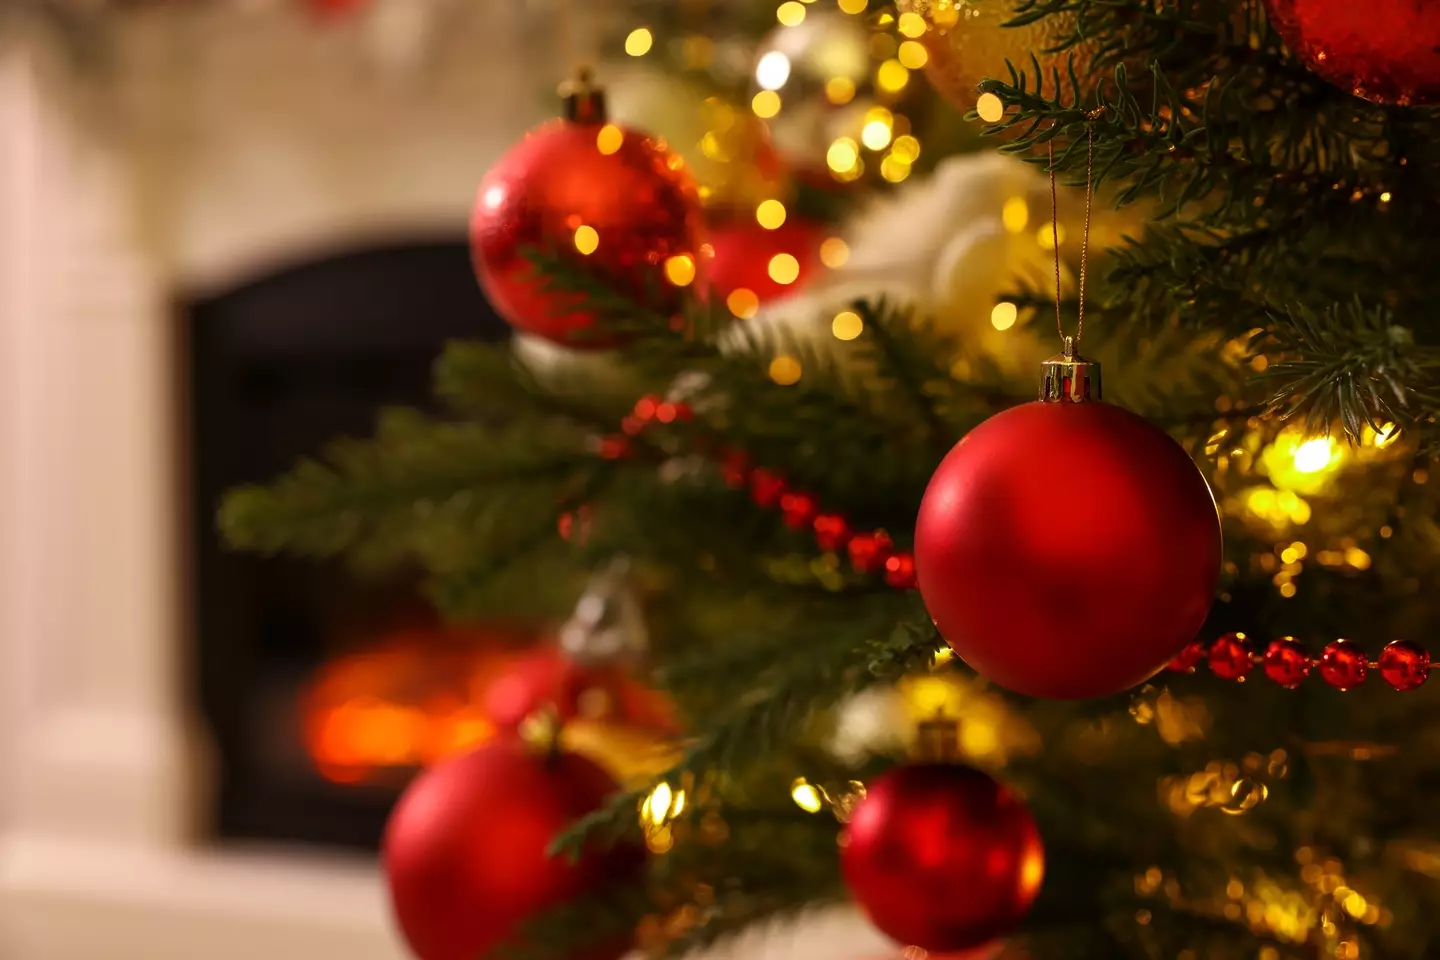 The expert says you should avoid placing your tree in entryways.